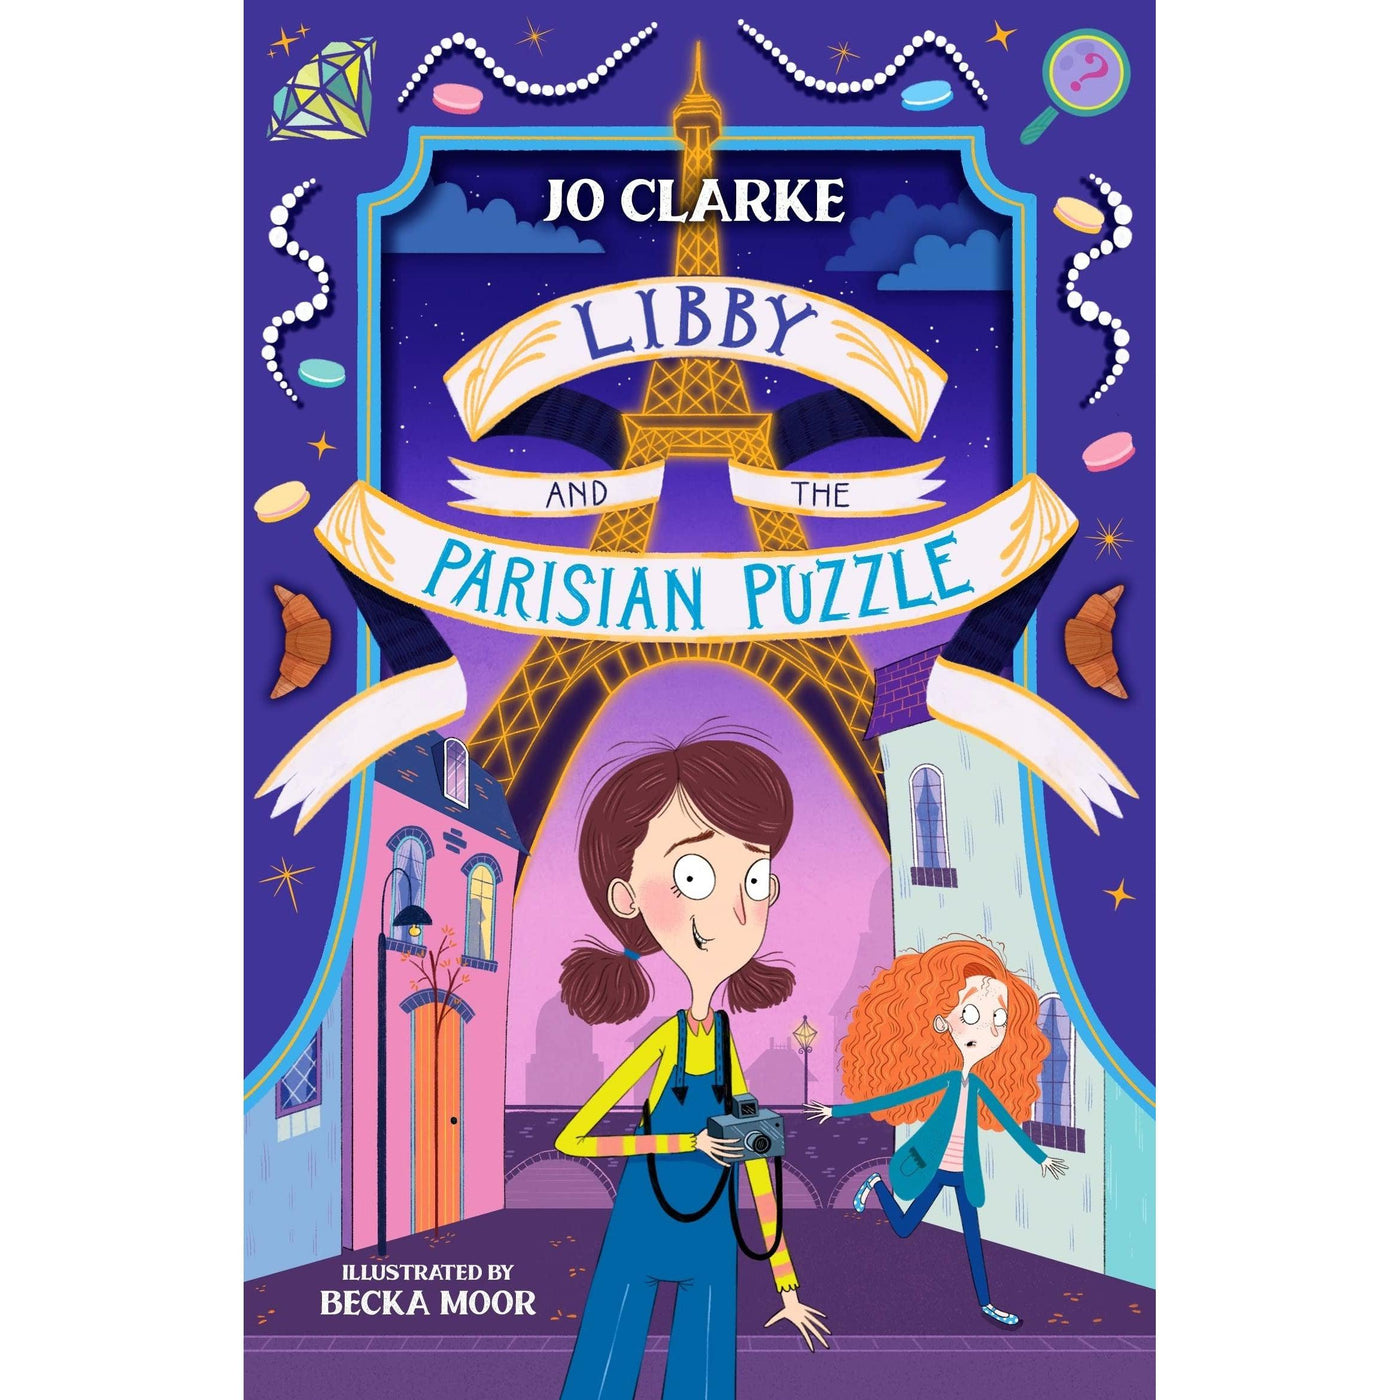 Libby And The Parisian Puzzle (The Travelling School Mysteries 1) - Jo Clarke & Becka Moor